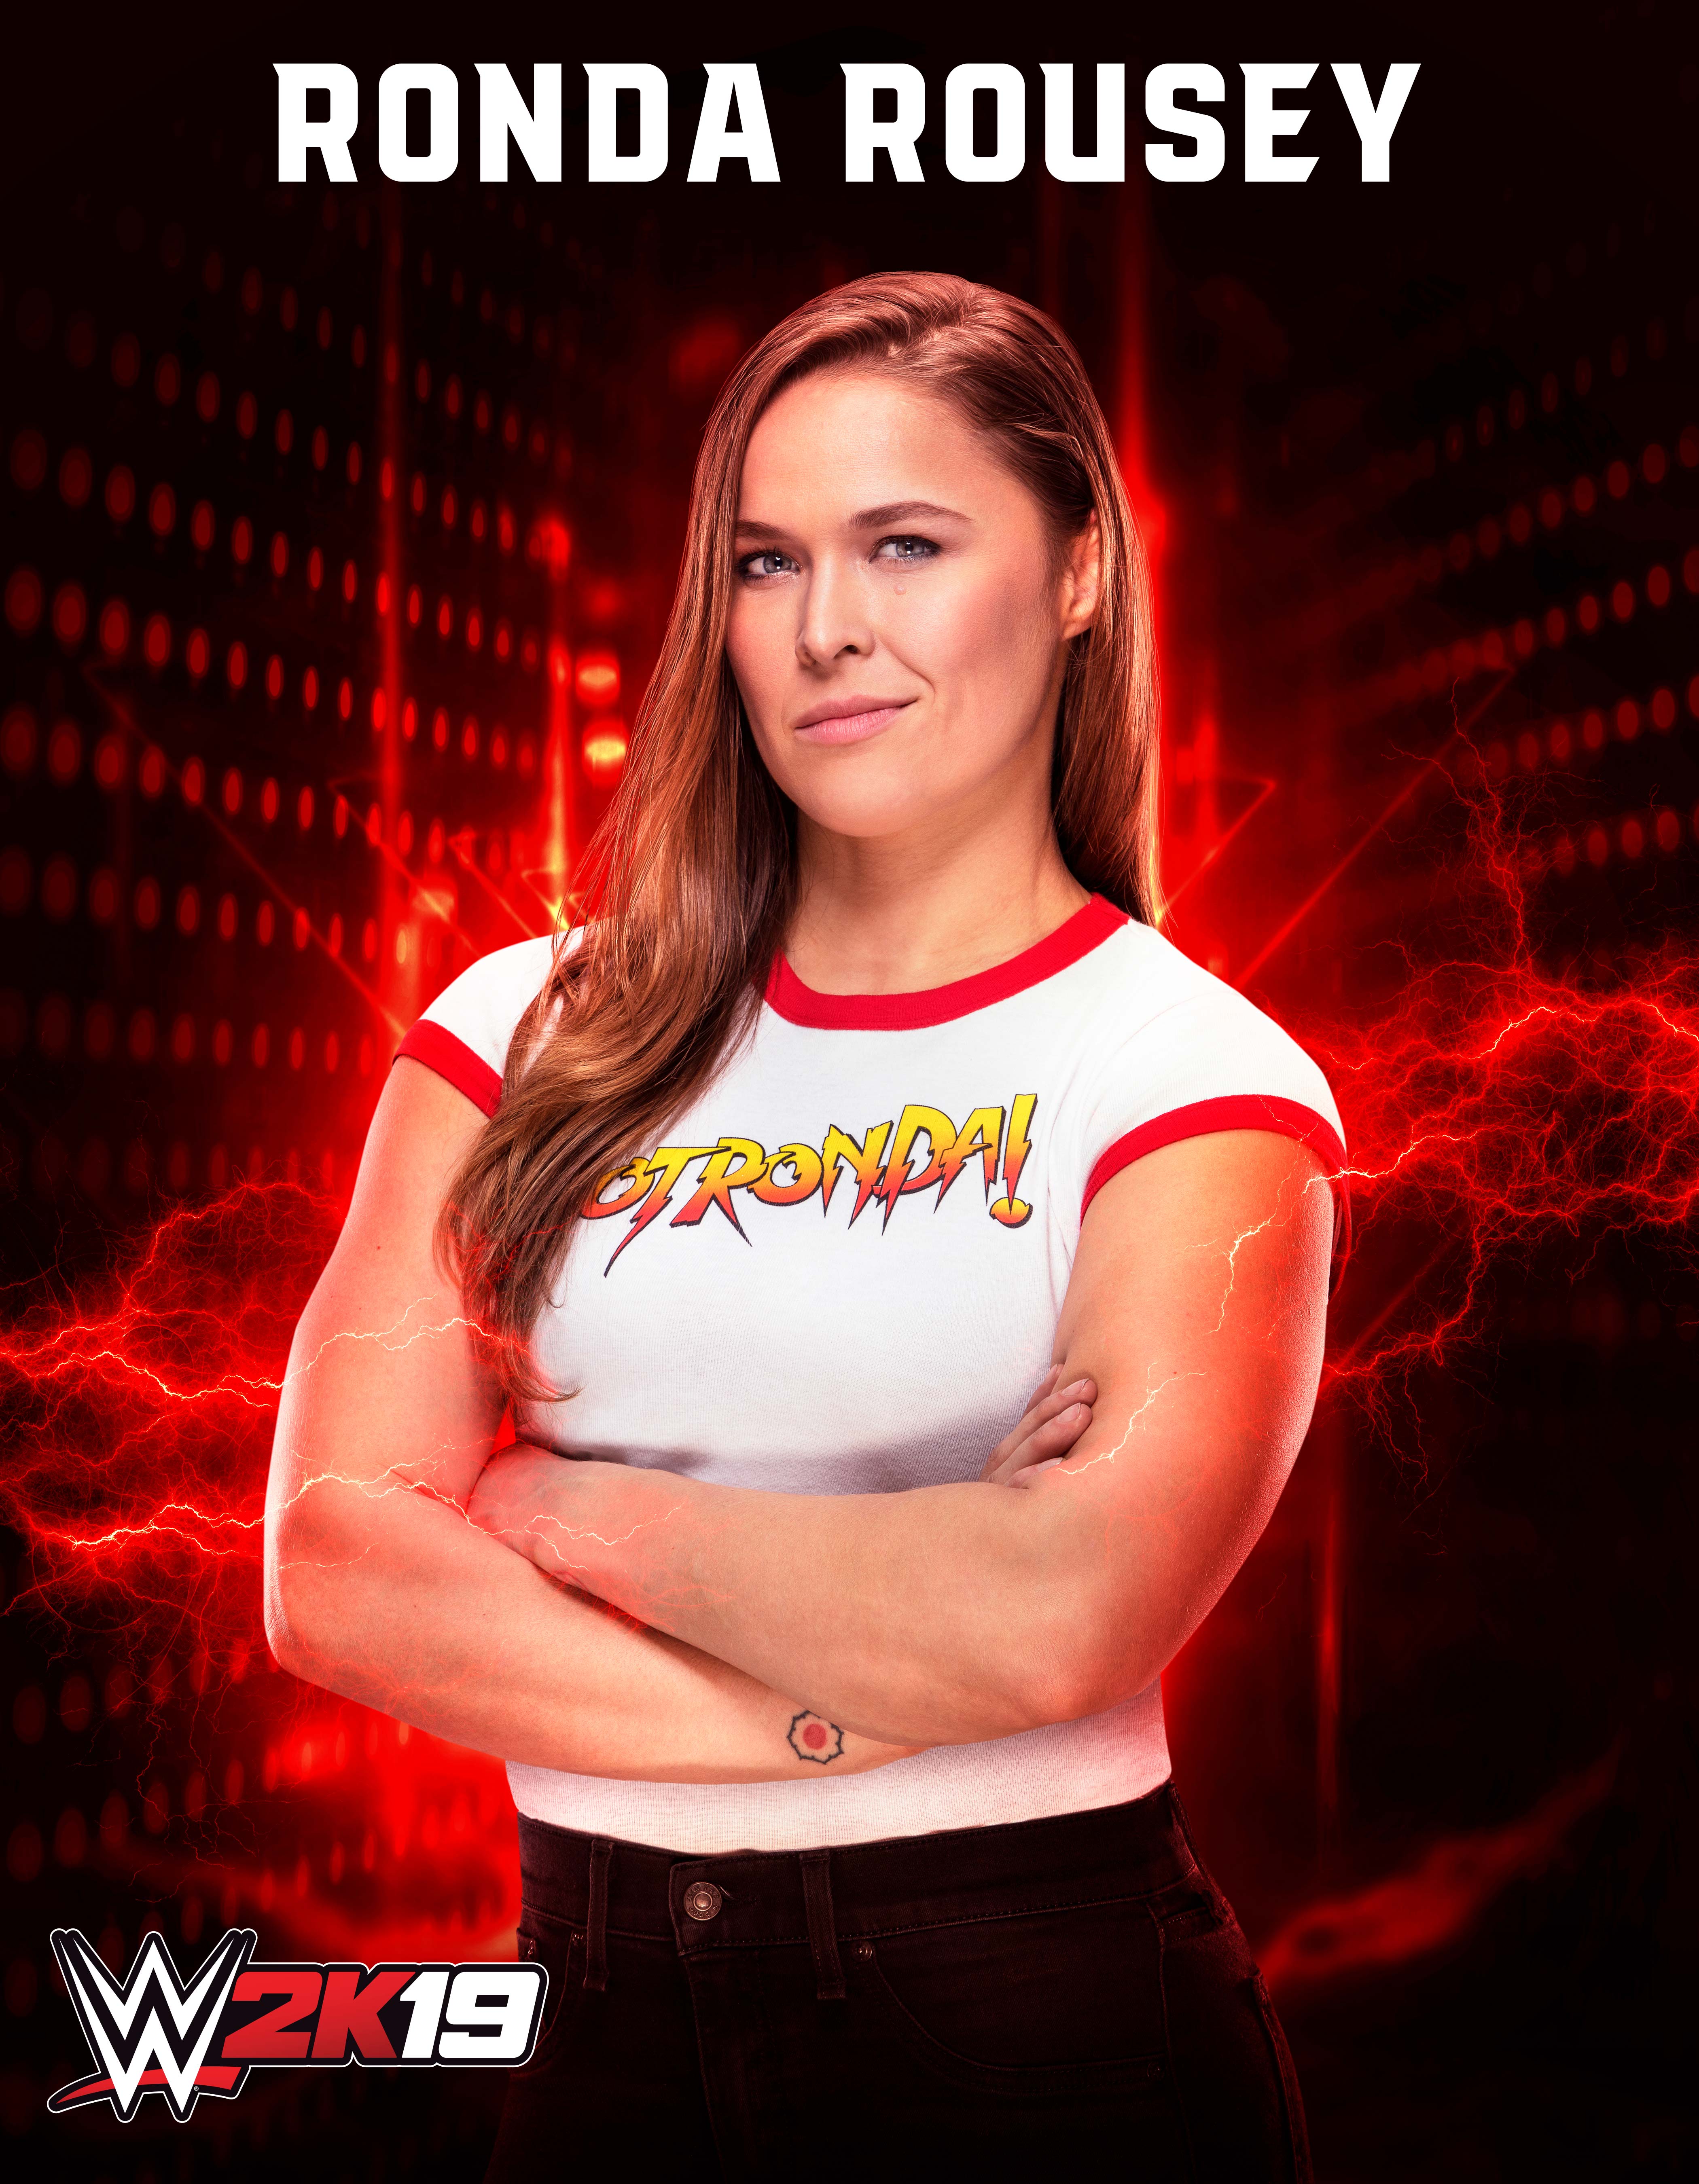 Wwe2k19 Roster Ronda Rousey